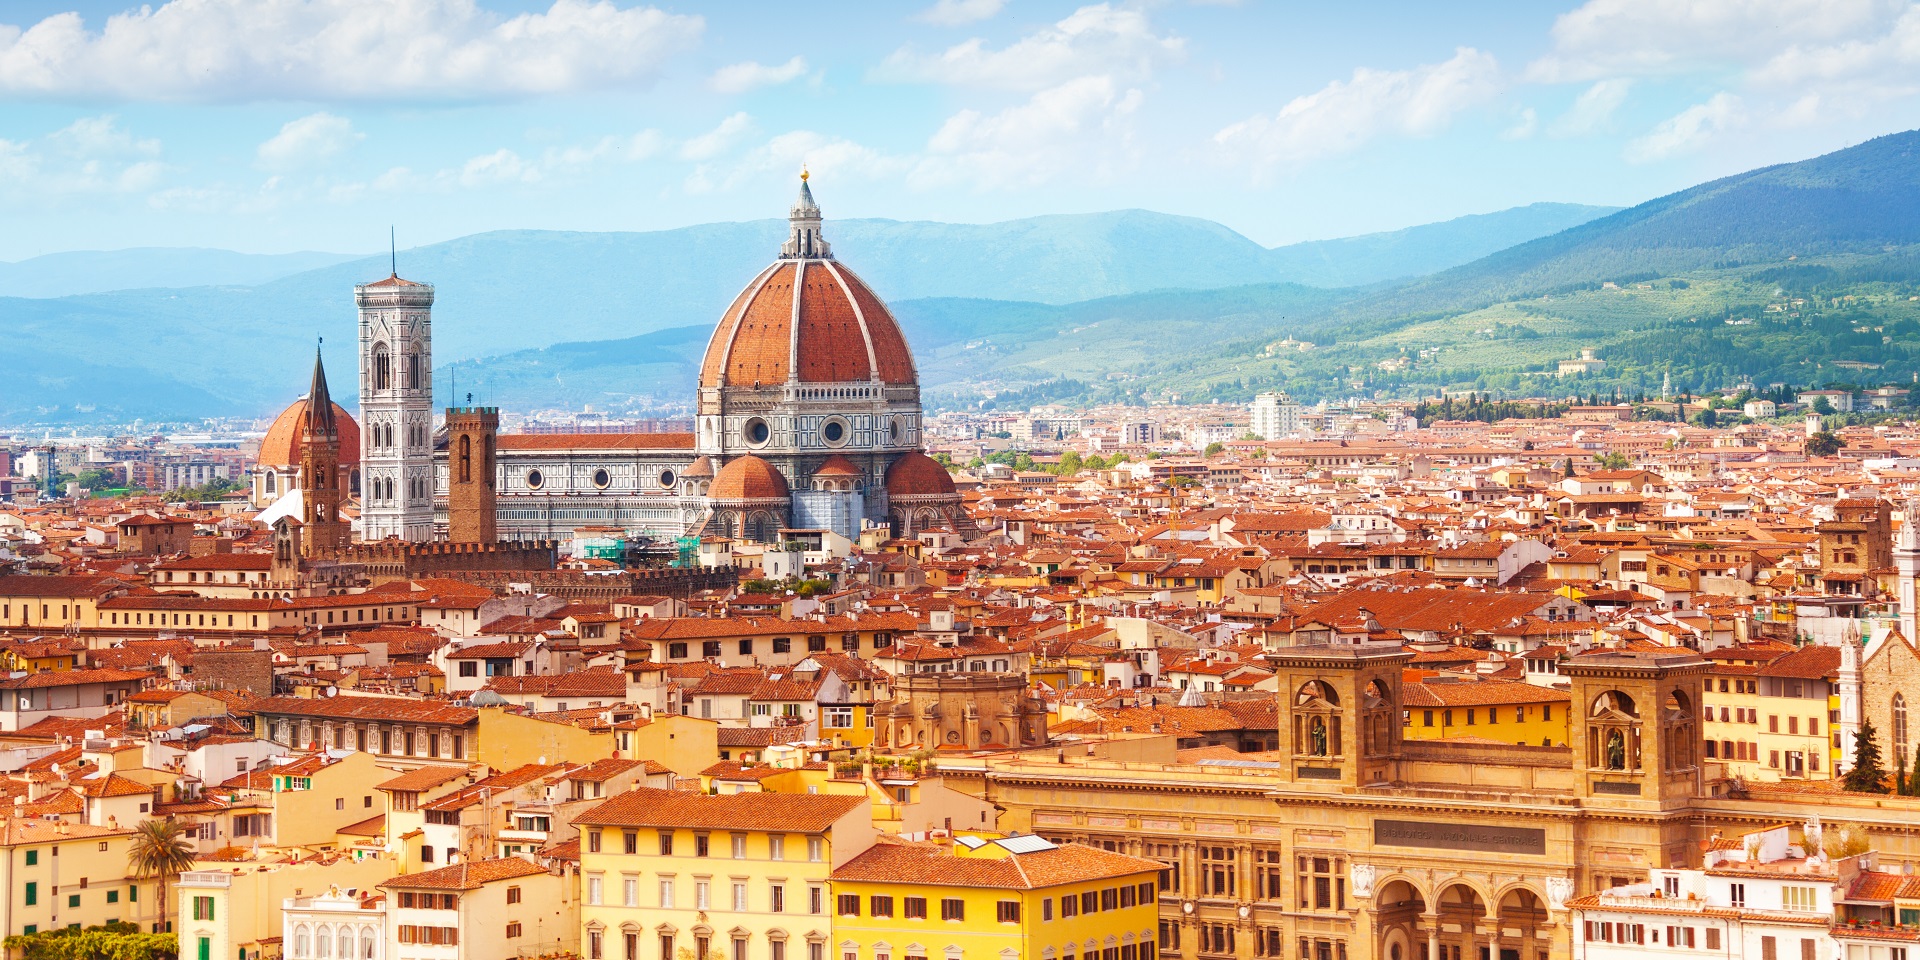 City skyline of Florence, Italy